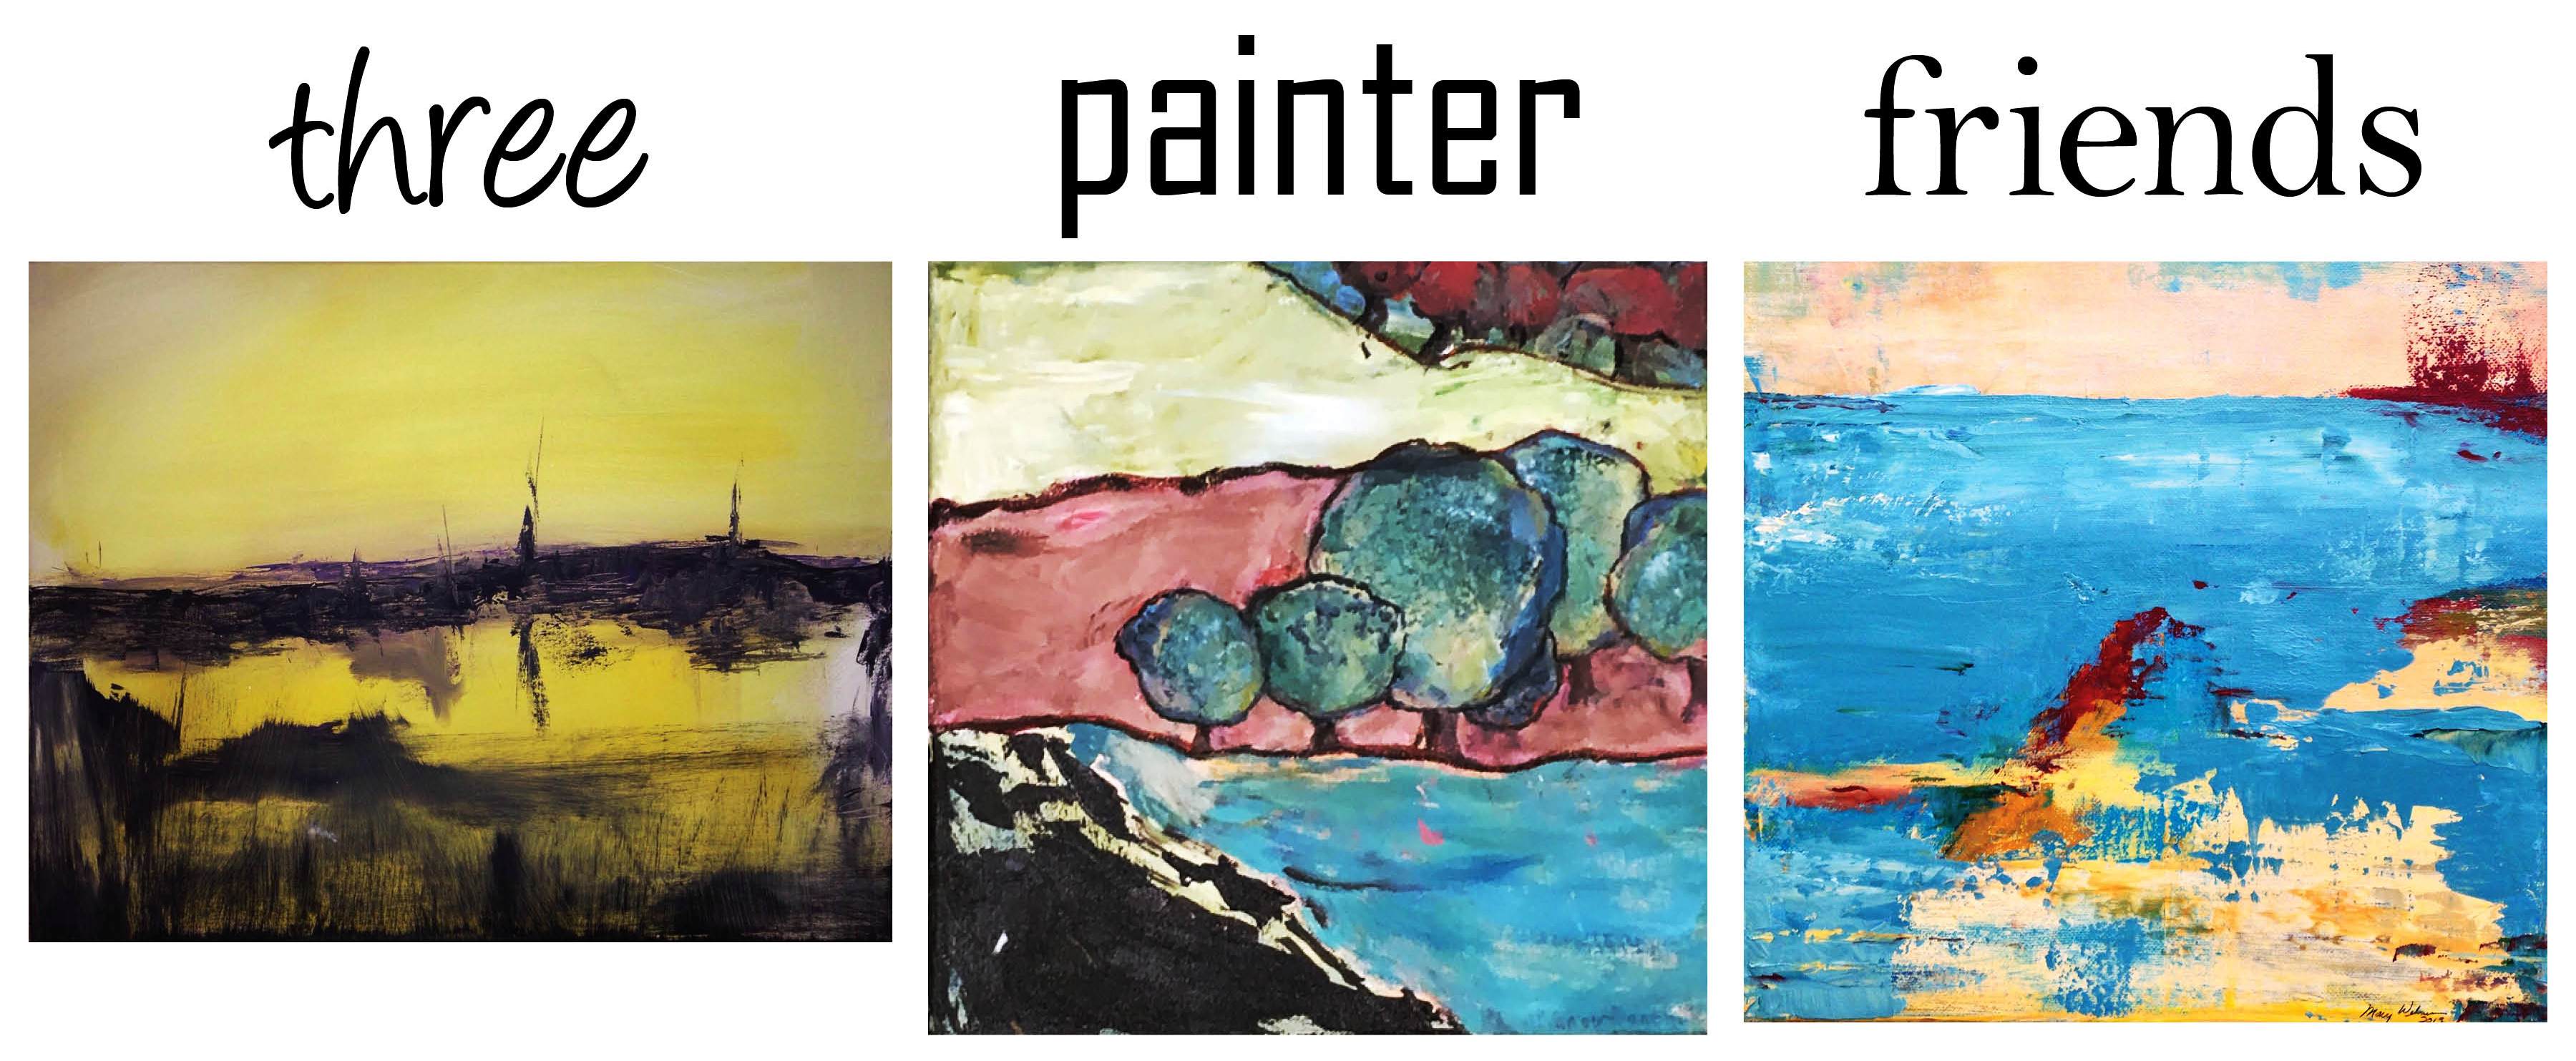 ‘Three Painter Friends’ exhibit at gallery in July